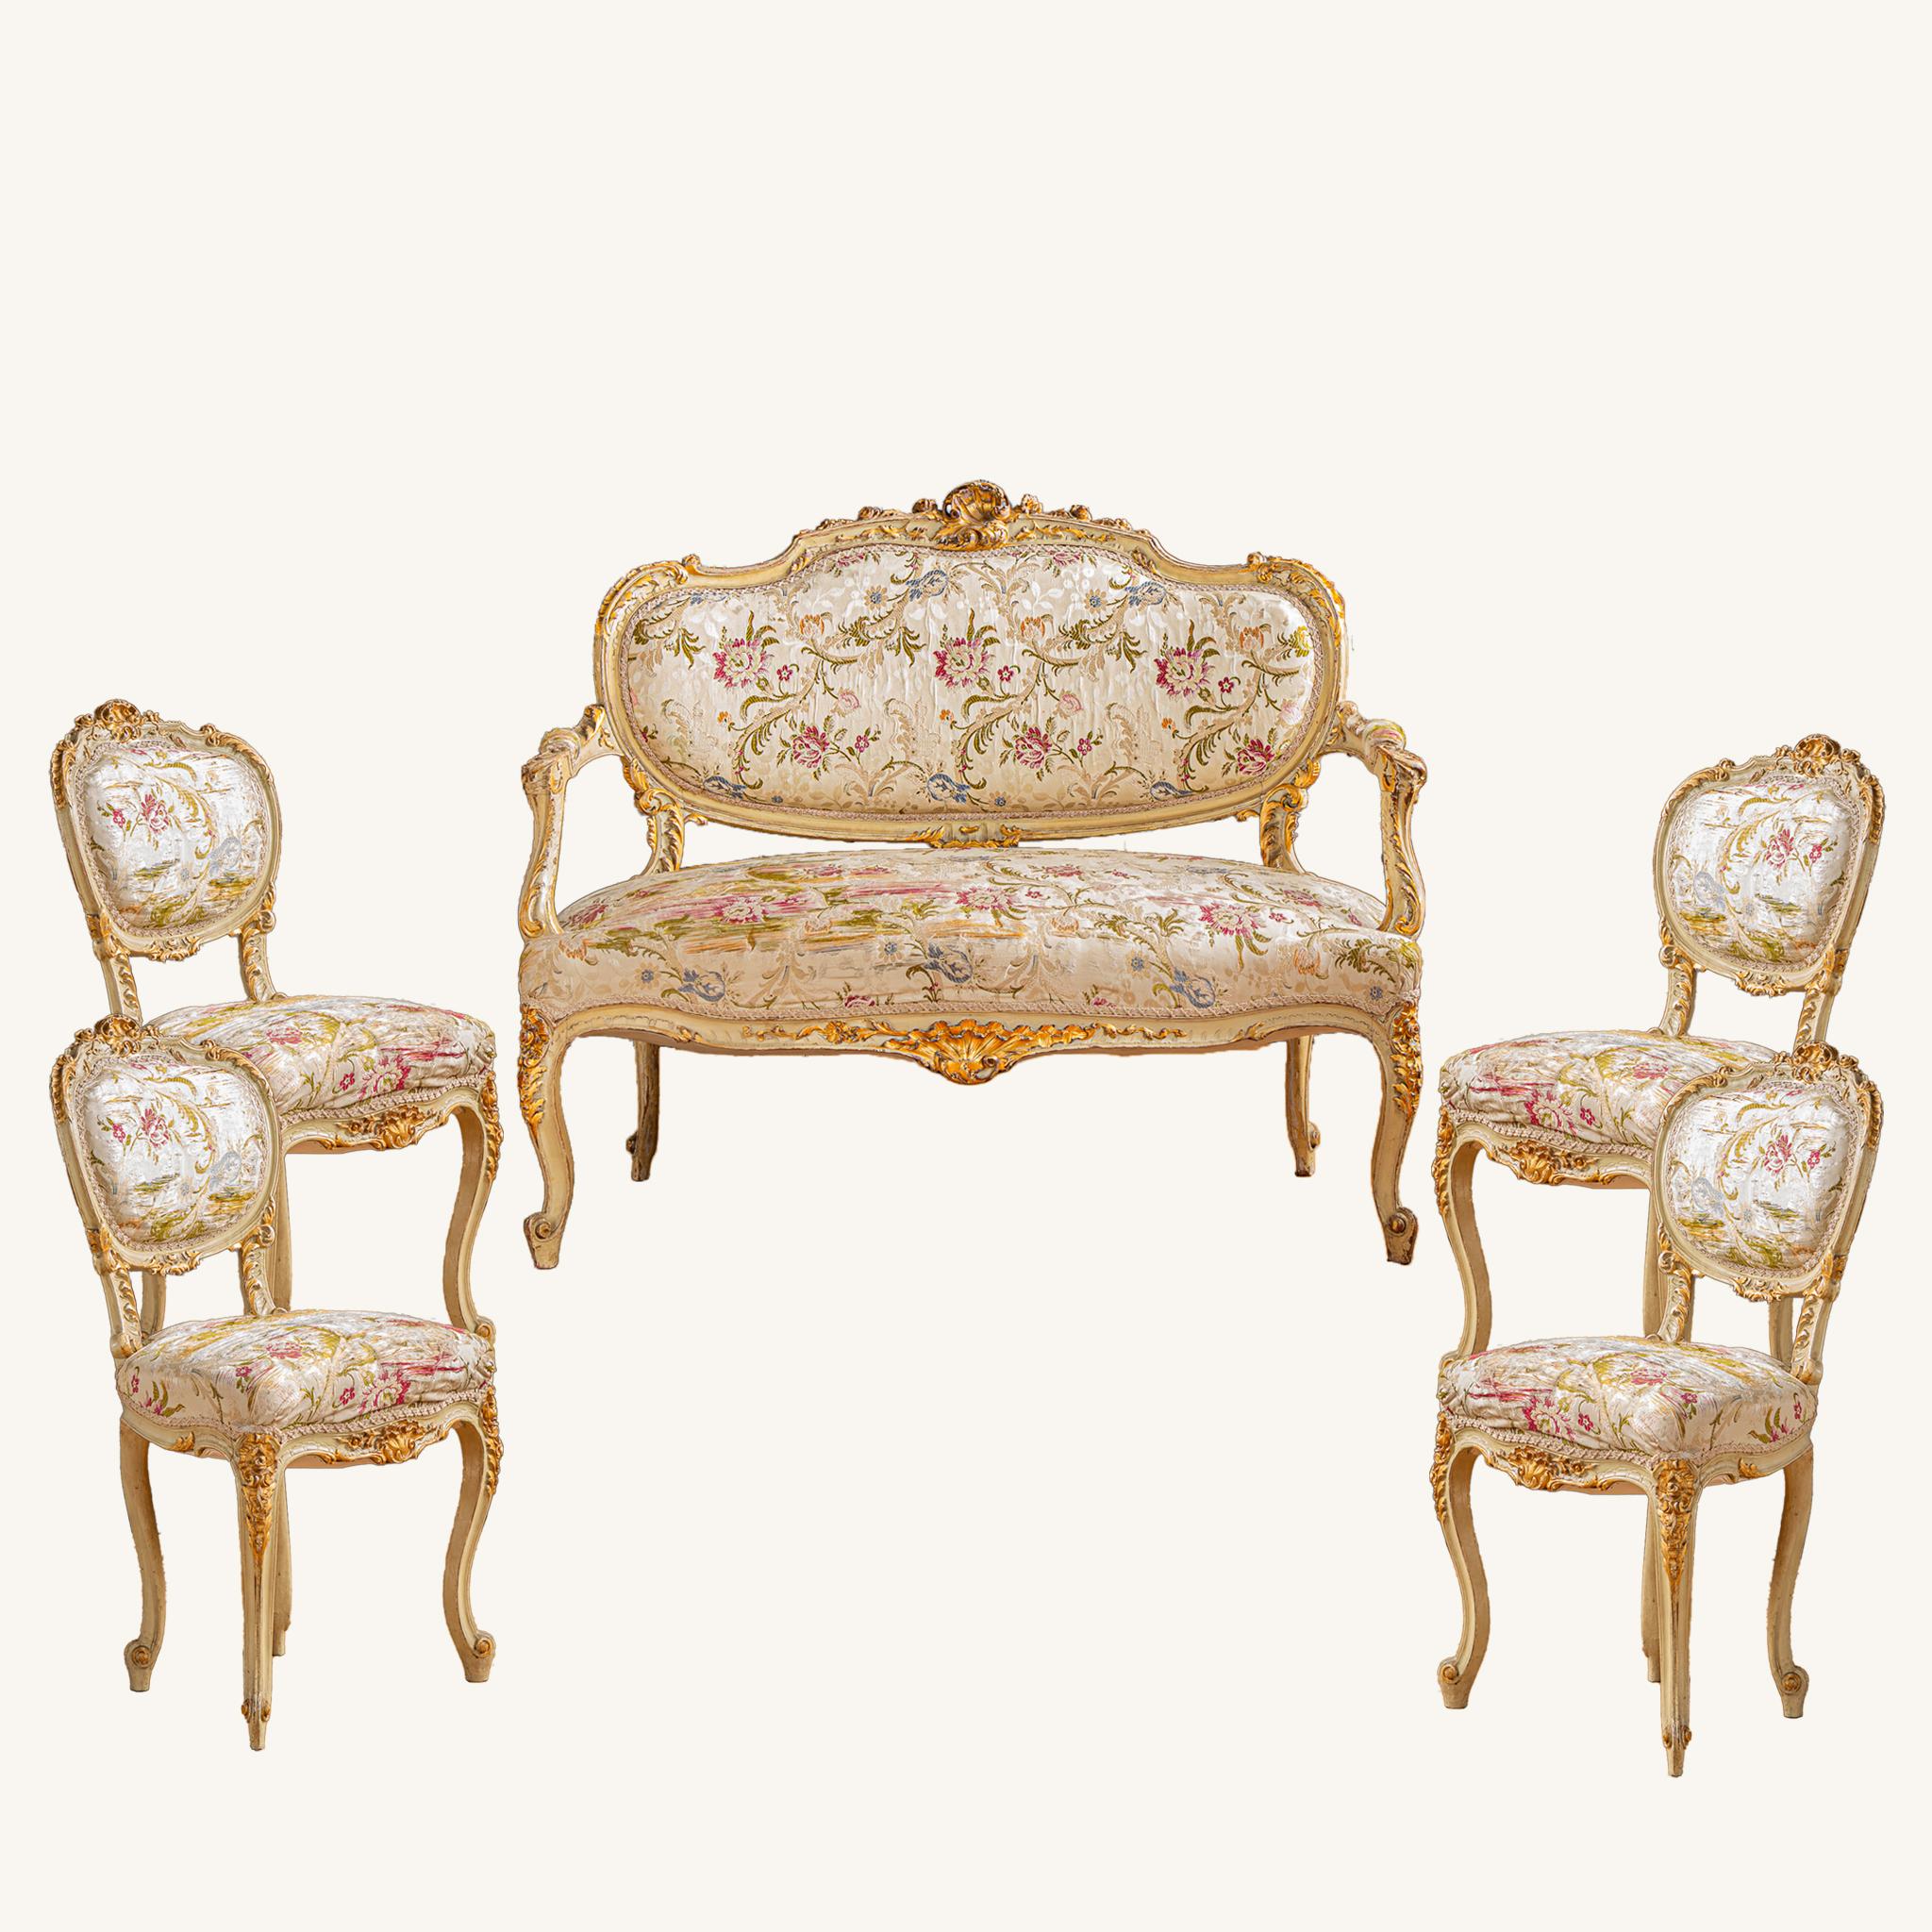 19th Century Italian Carved Gilt-wood Salon Suite - Sofa, Chairs & Footstools  For Sale 13